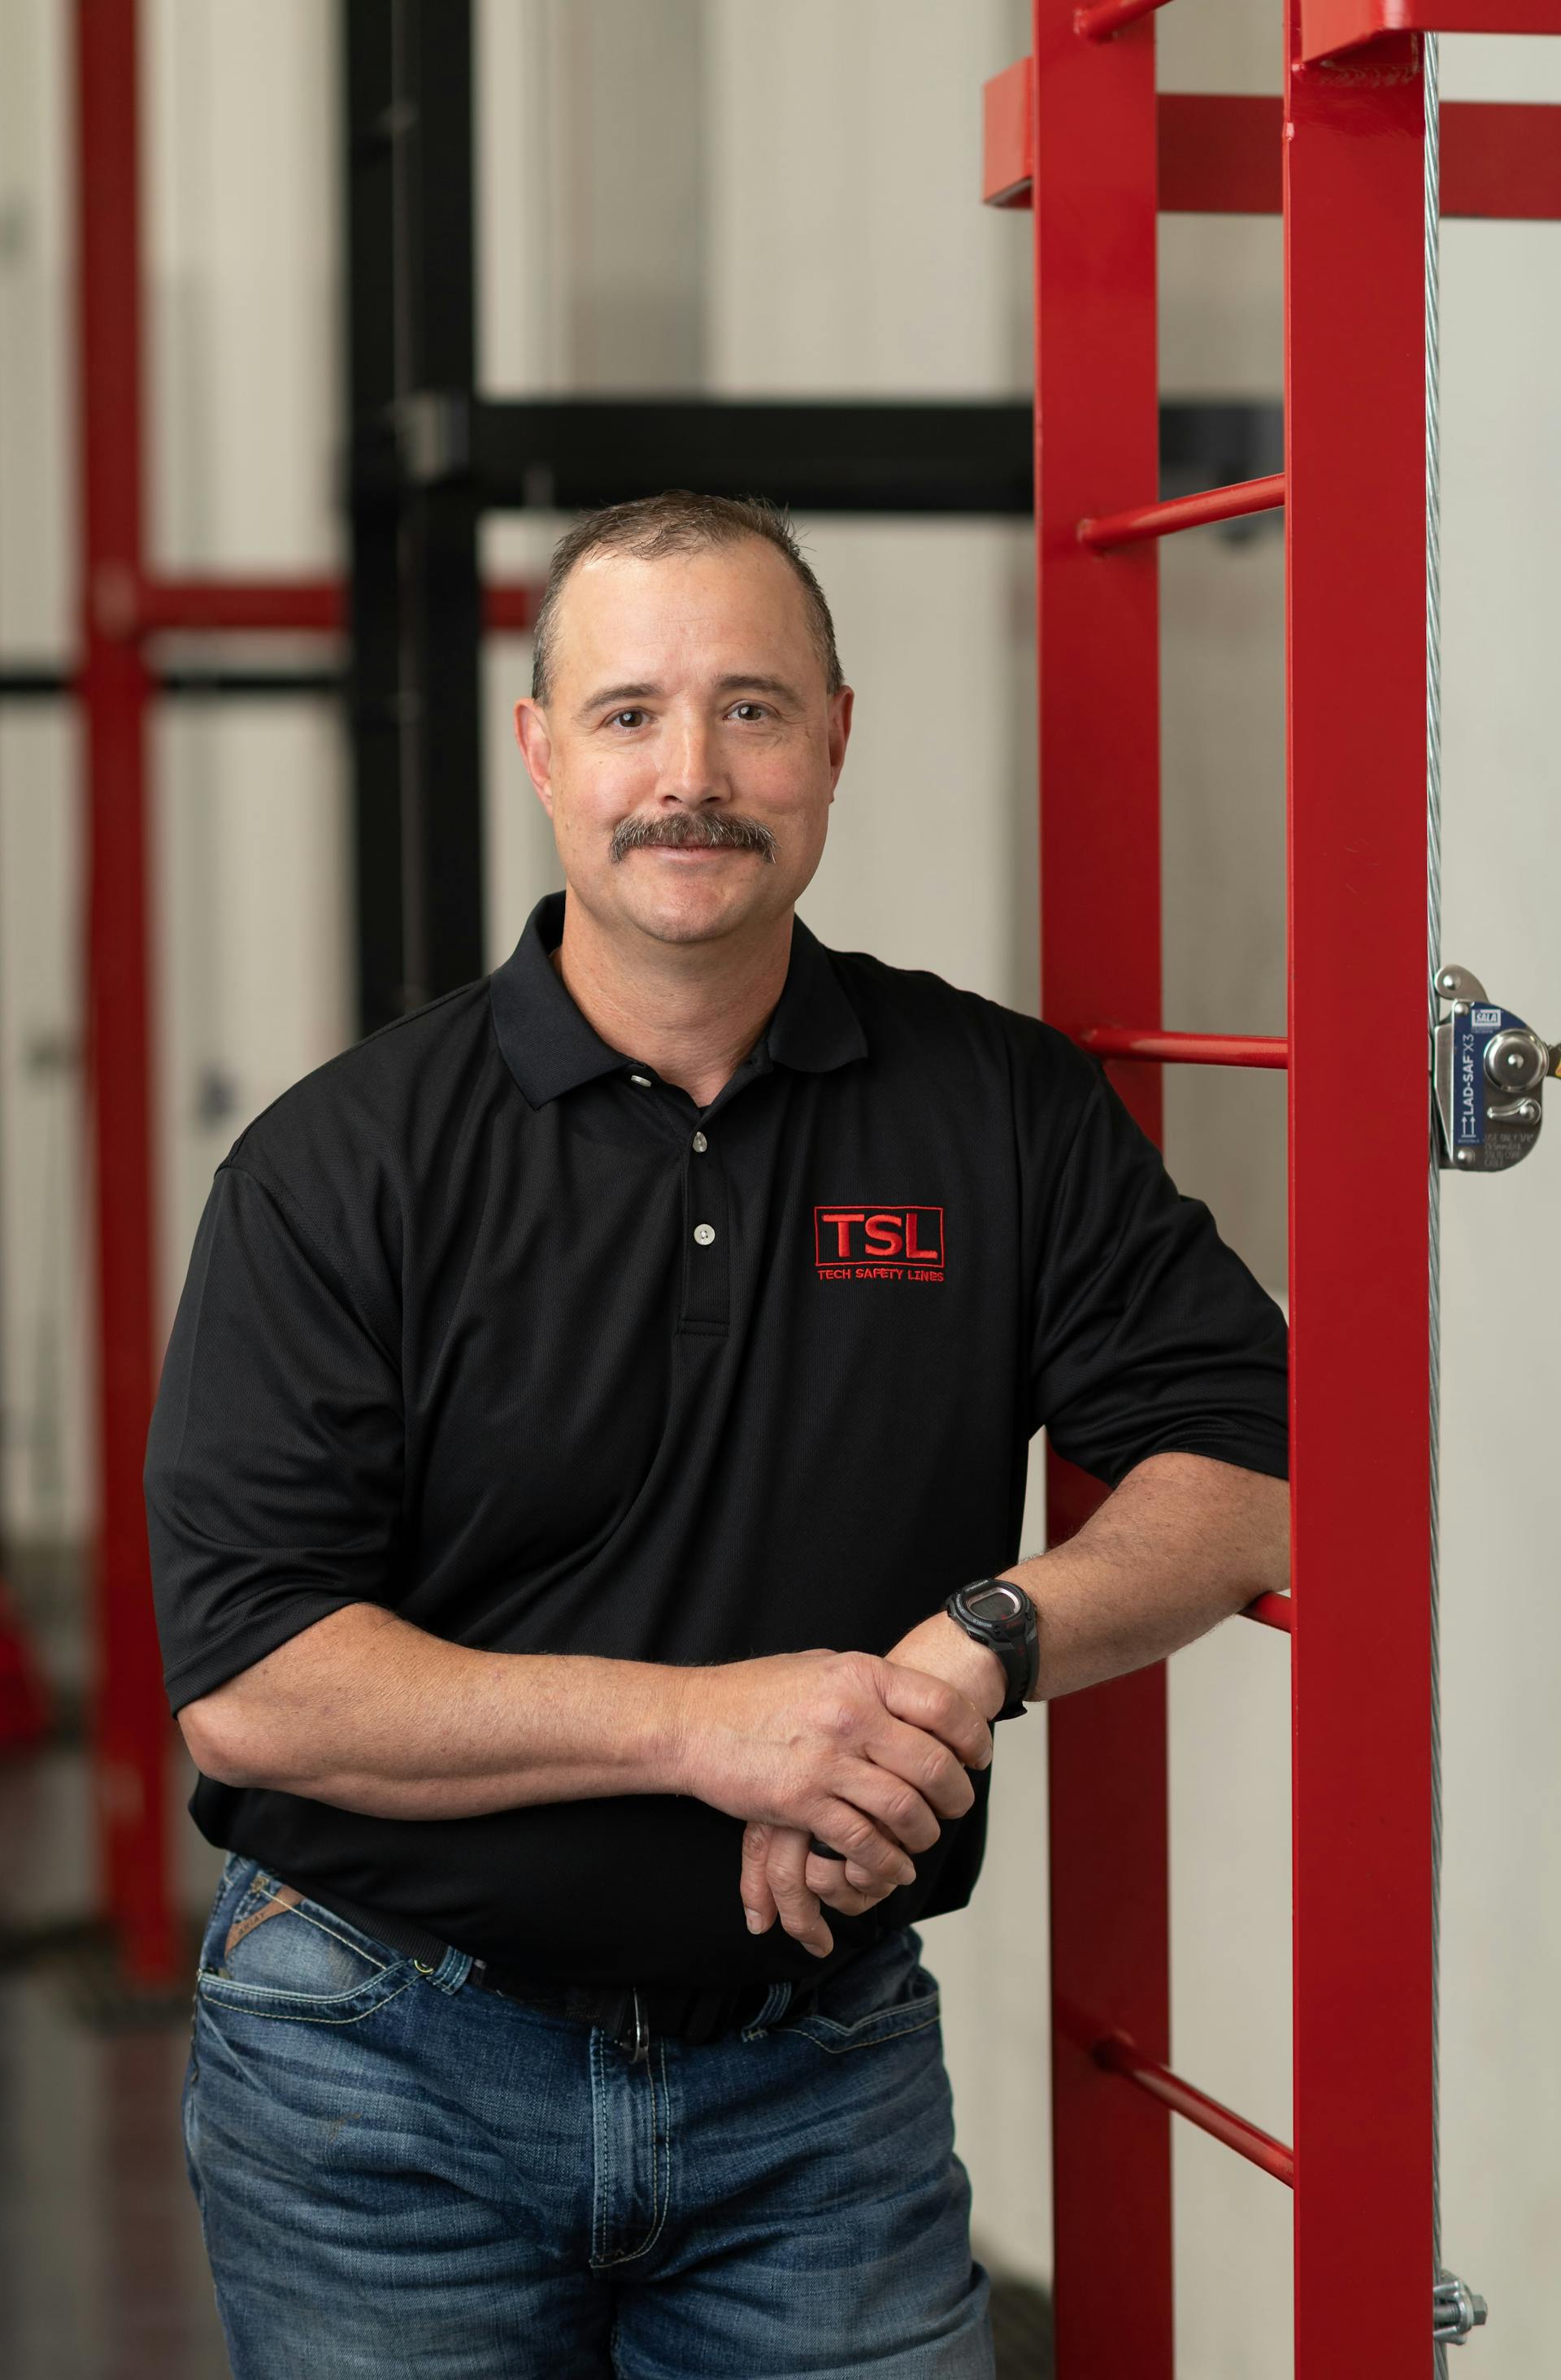 Joe Don D., Tech Safety Lines Trainer